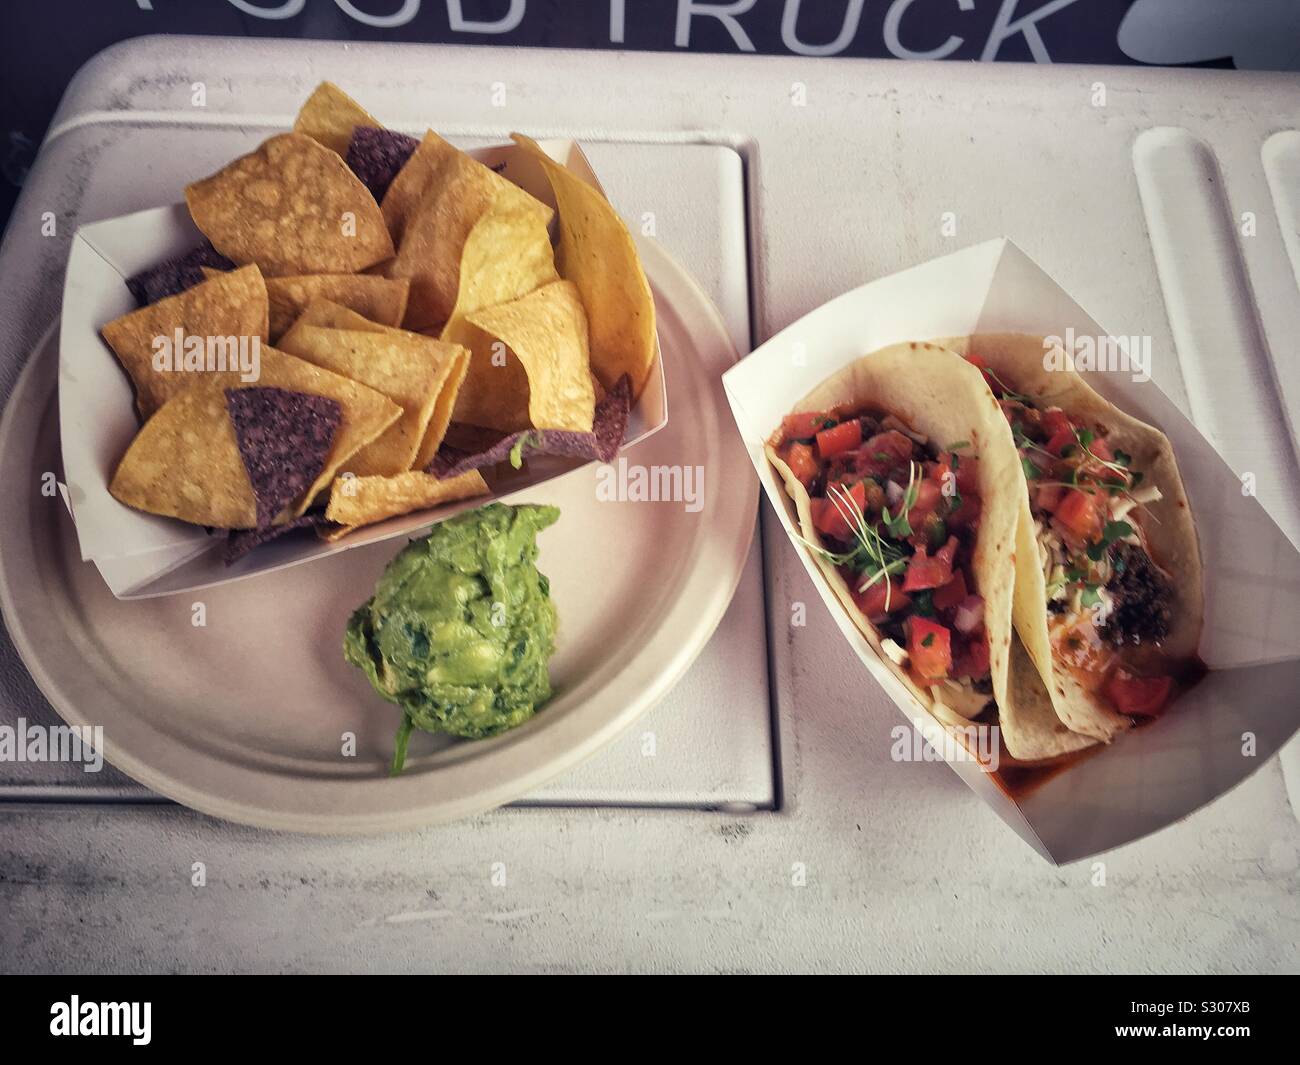 Food Truck Tacos, Chips and Guacamole Stock Photo